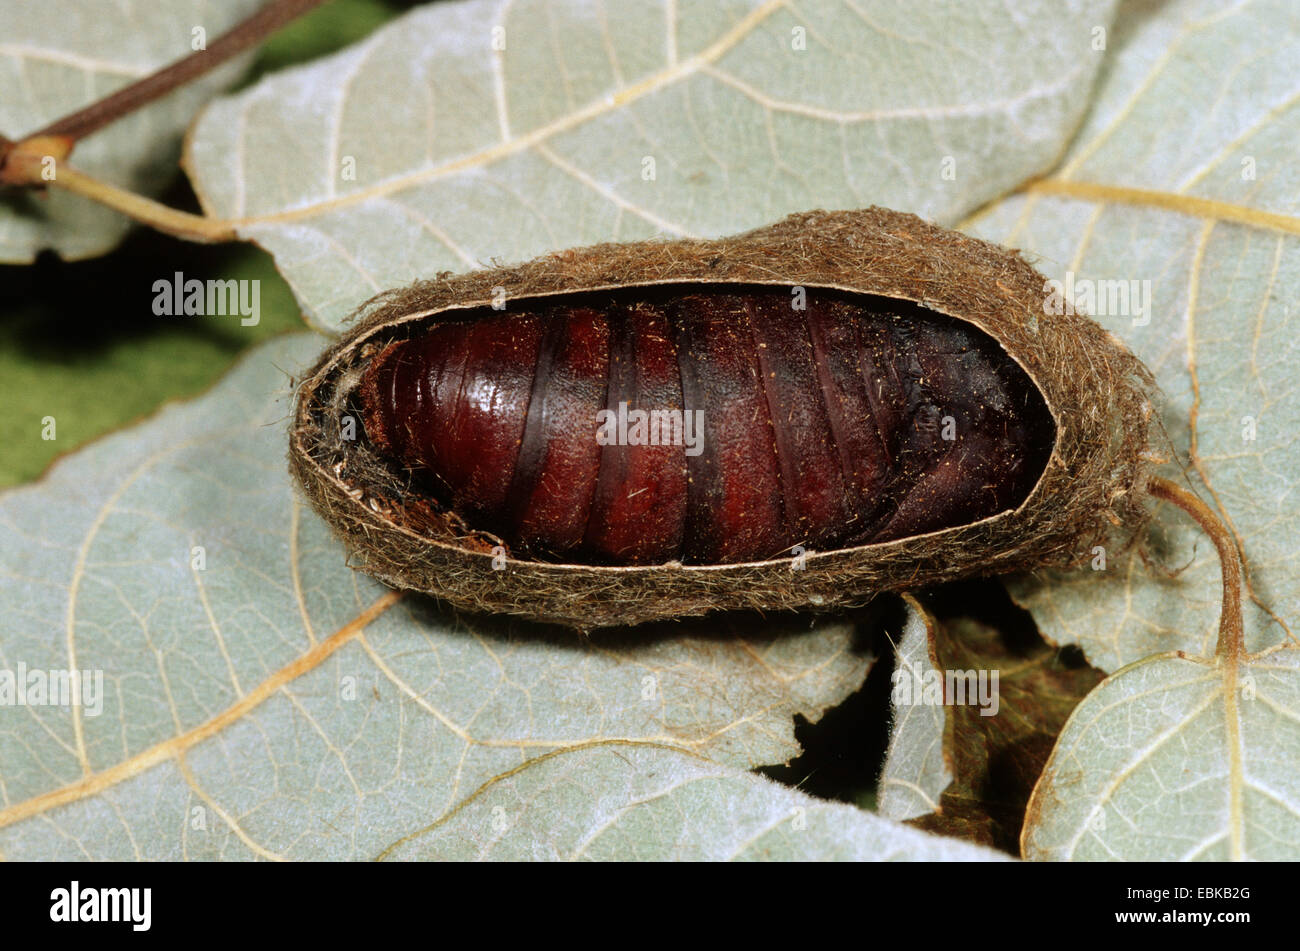 oak eggar (Lasiocampa quercus), pupal stage in opened cocoon, Germany Stock Photo